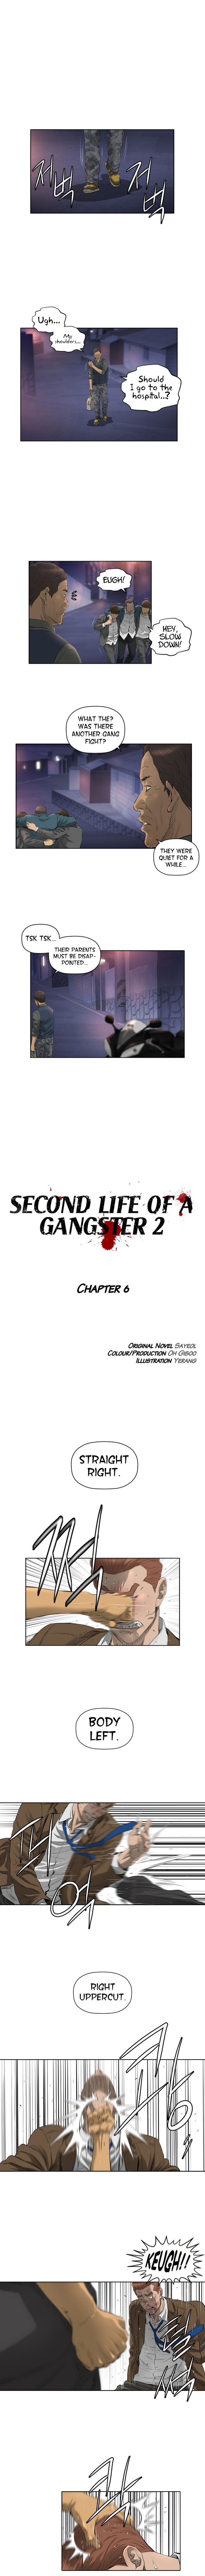 second-life-of-a-gangster-chap-58-1